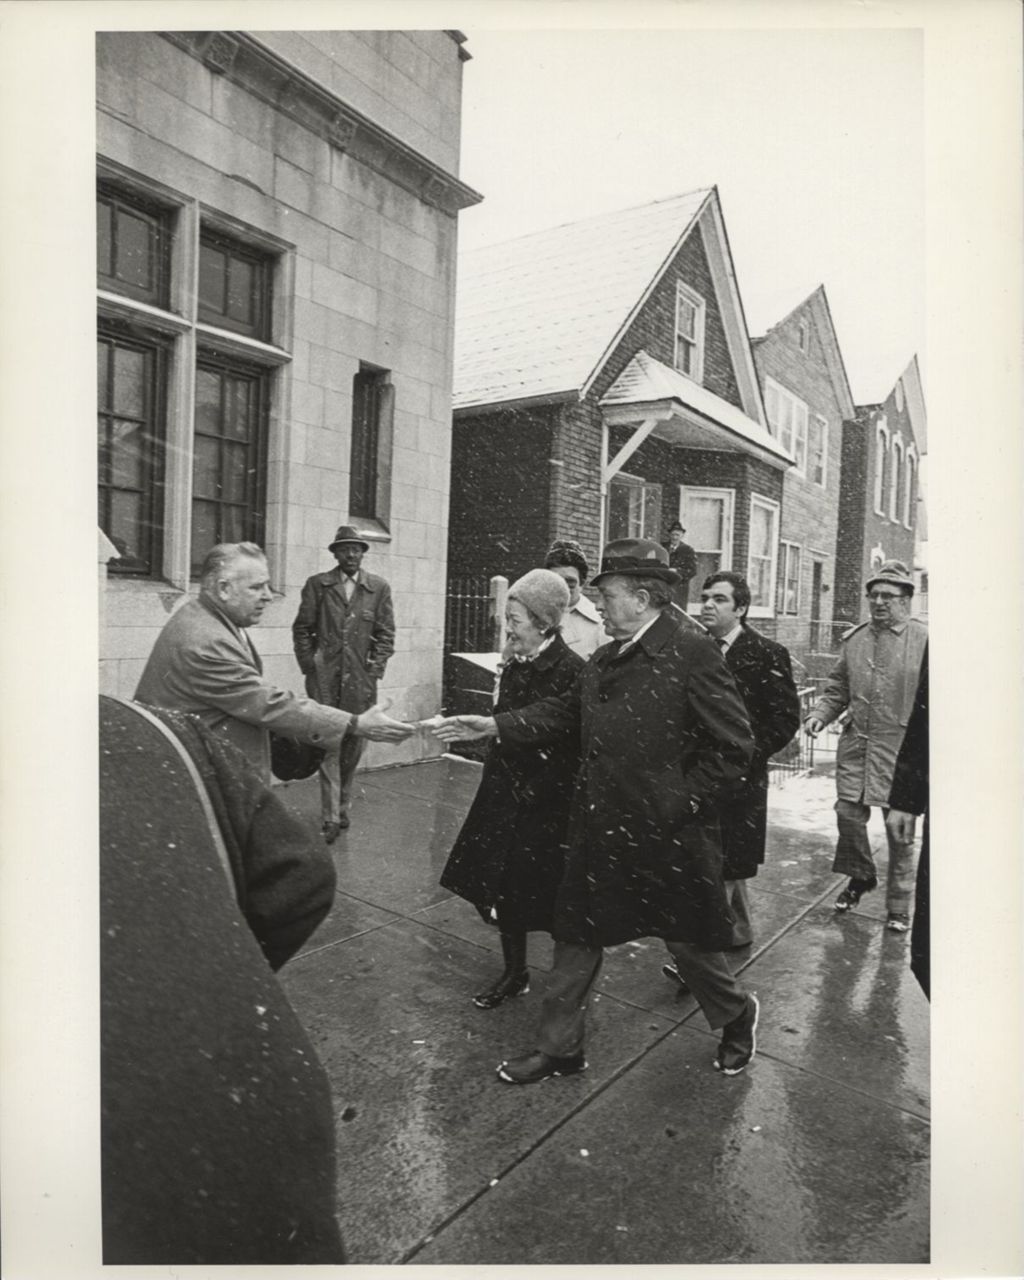 Richard J. Daley on his way to the polls with Eleanor and John Daley